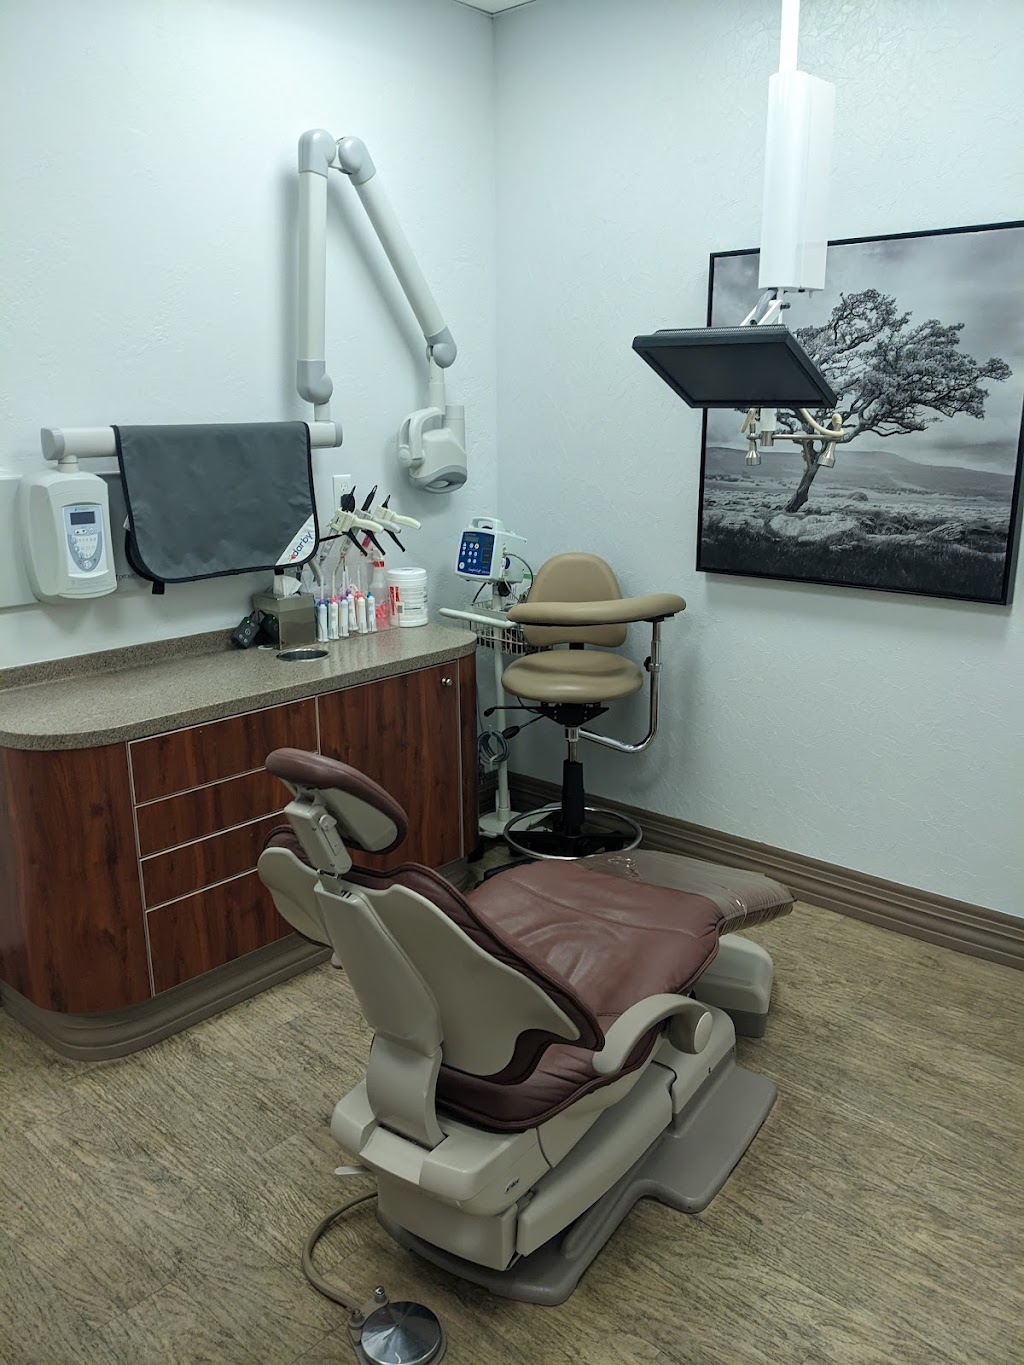 Pine Valley Dental: Aaron B. Pitts, DMD | 28914 Old Hwy 80 Suite 104, Pine Valley, CA 91962, USA | Phone: (619) 473-8735